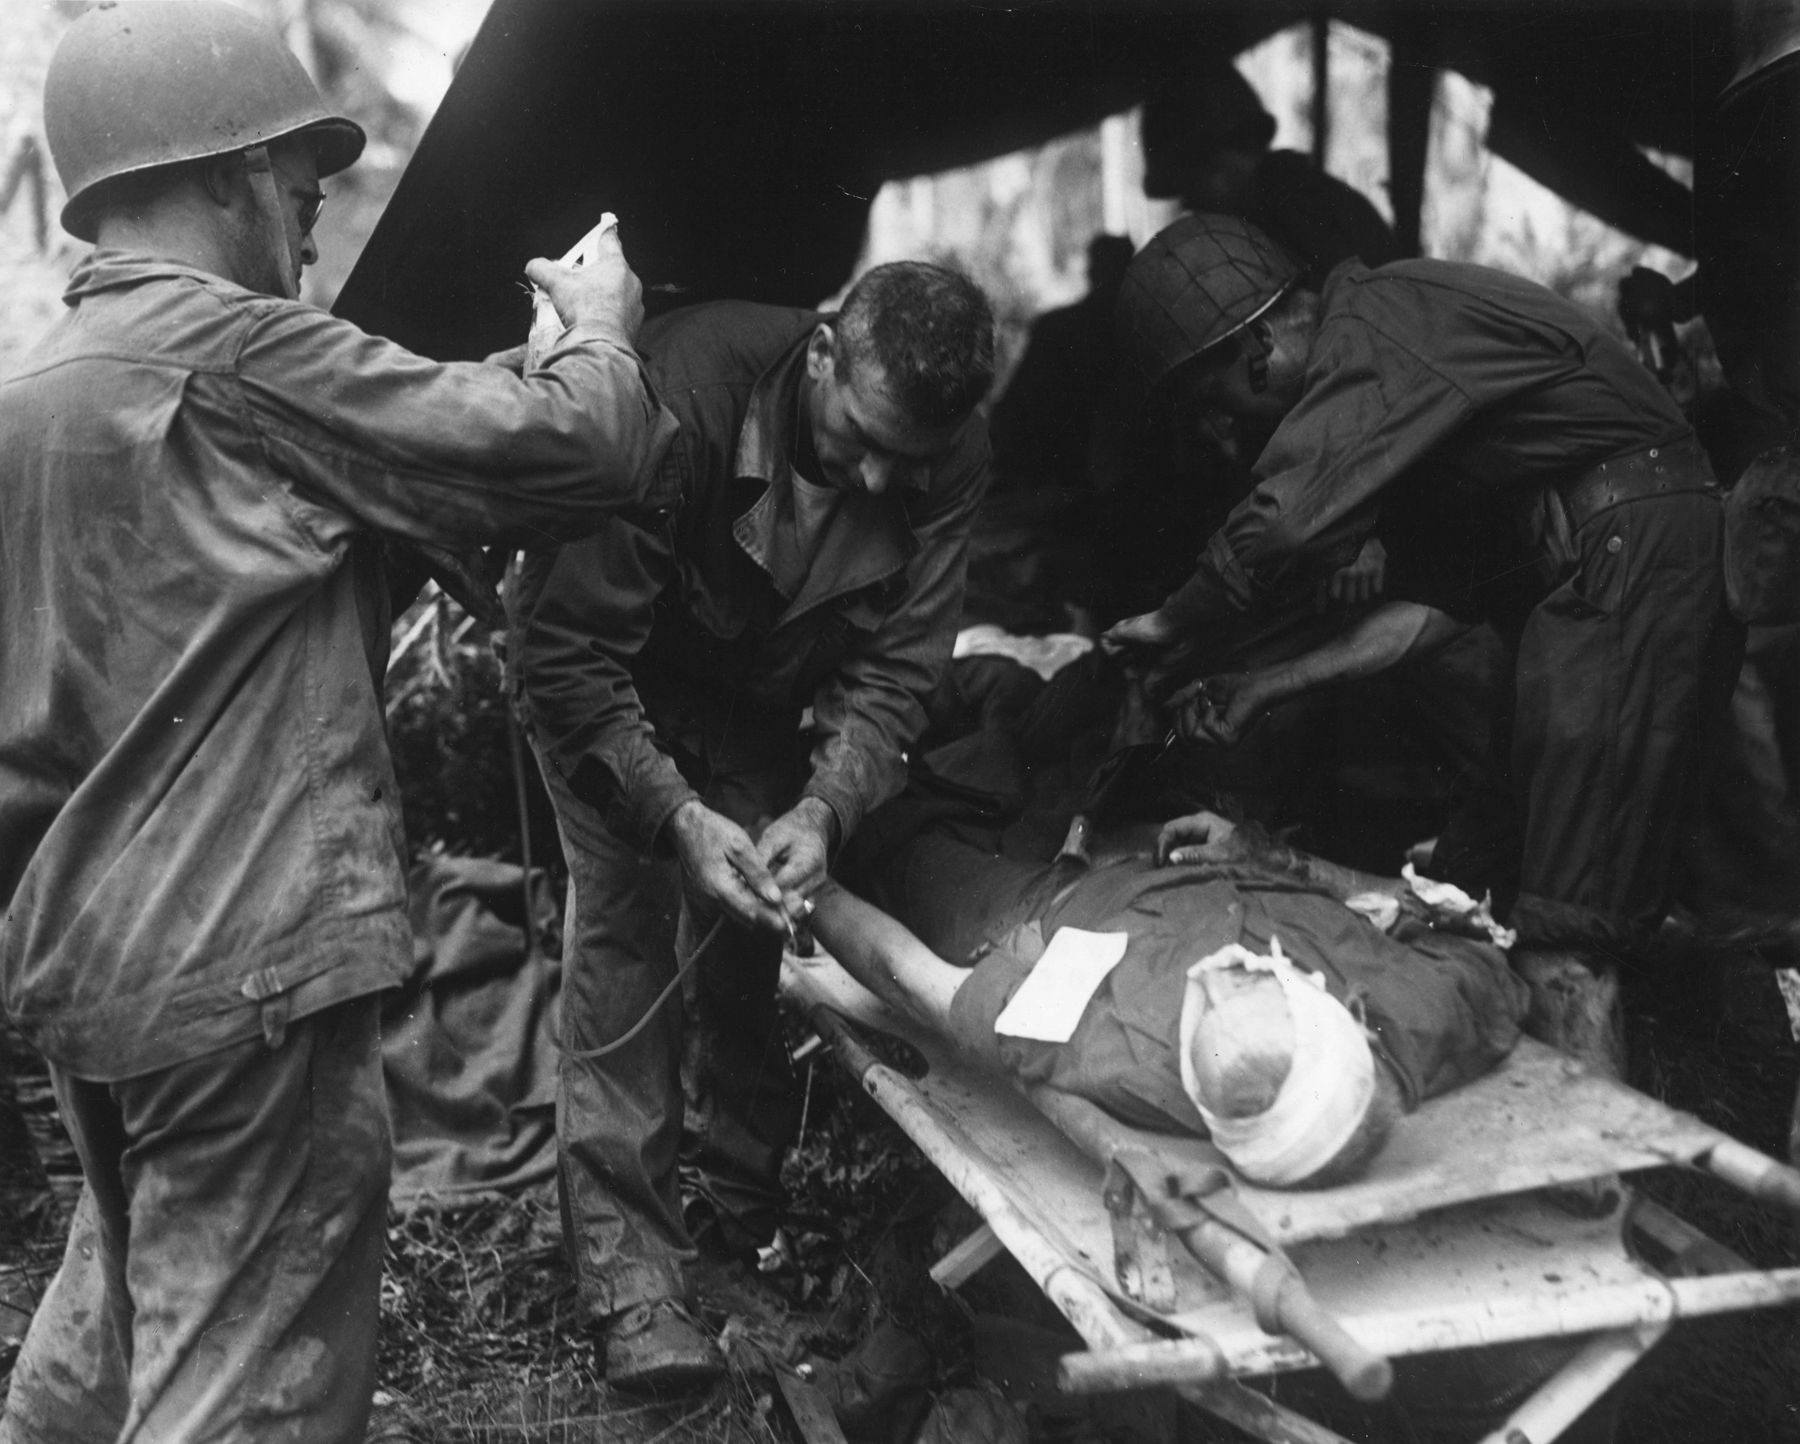 His head bandaged, a wounded Marine on the island of Rendova in the Solomons receives continuing care at an aid station near the front line.